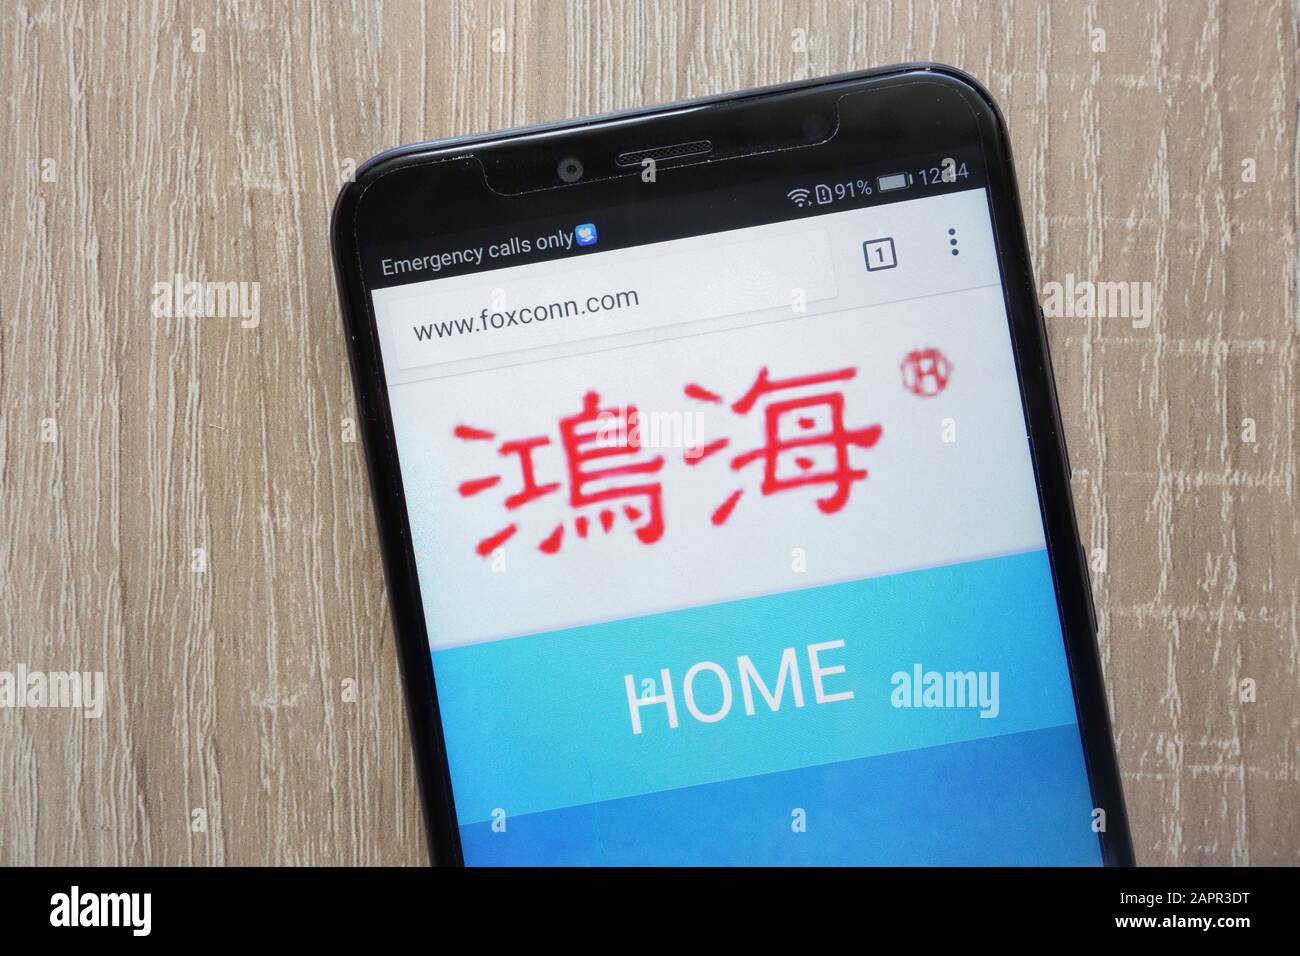 Foxconn website displayed on a modern smartphone Stock Photo